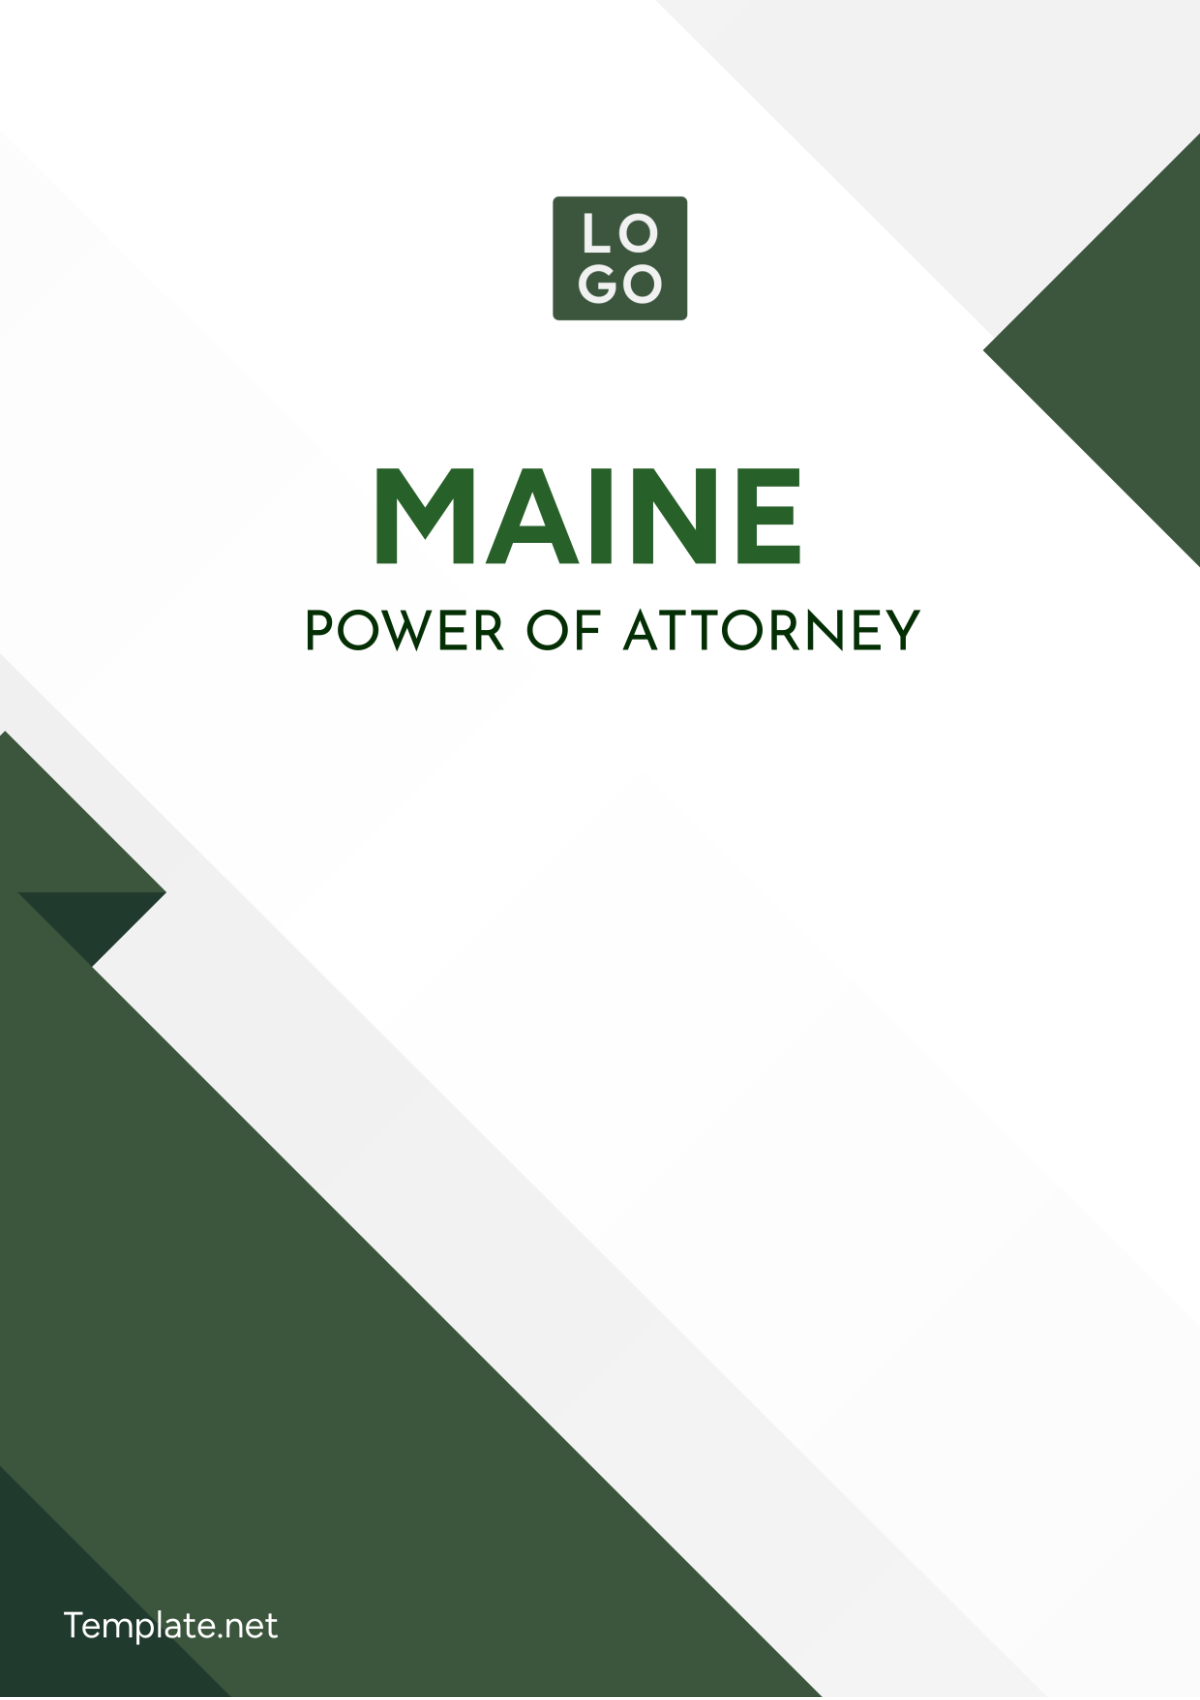 Maine Power of Attorney Template